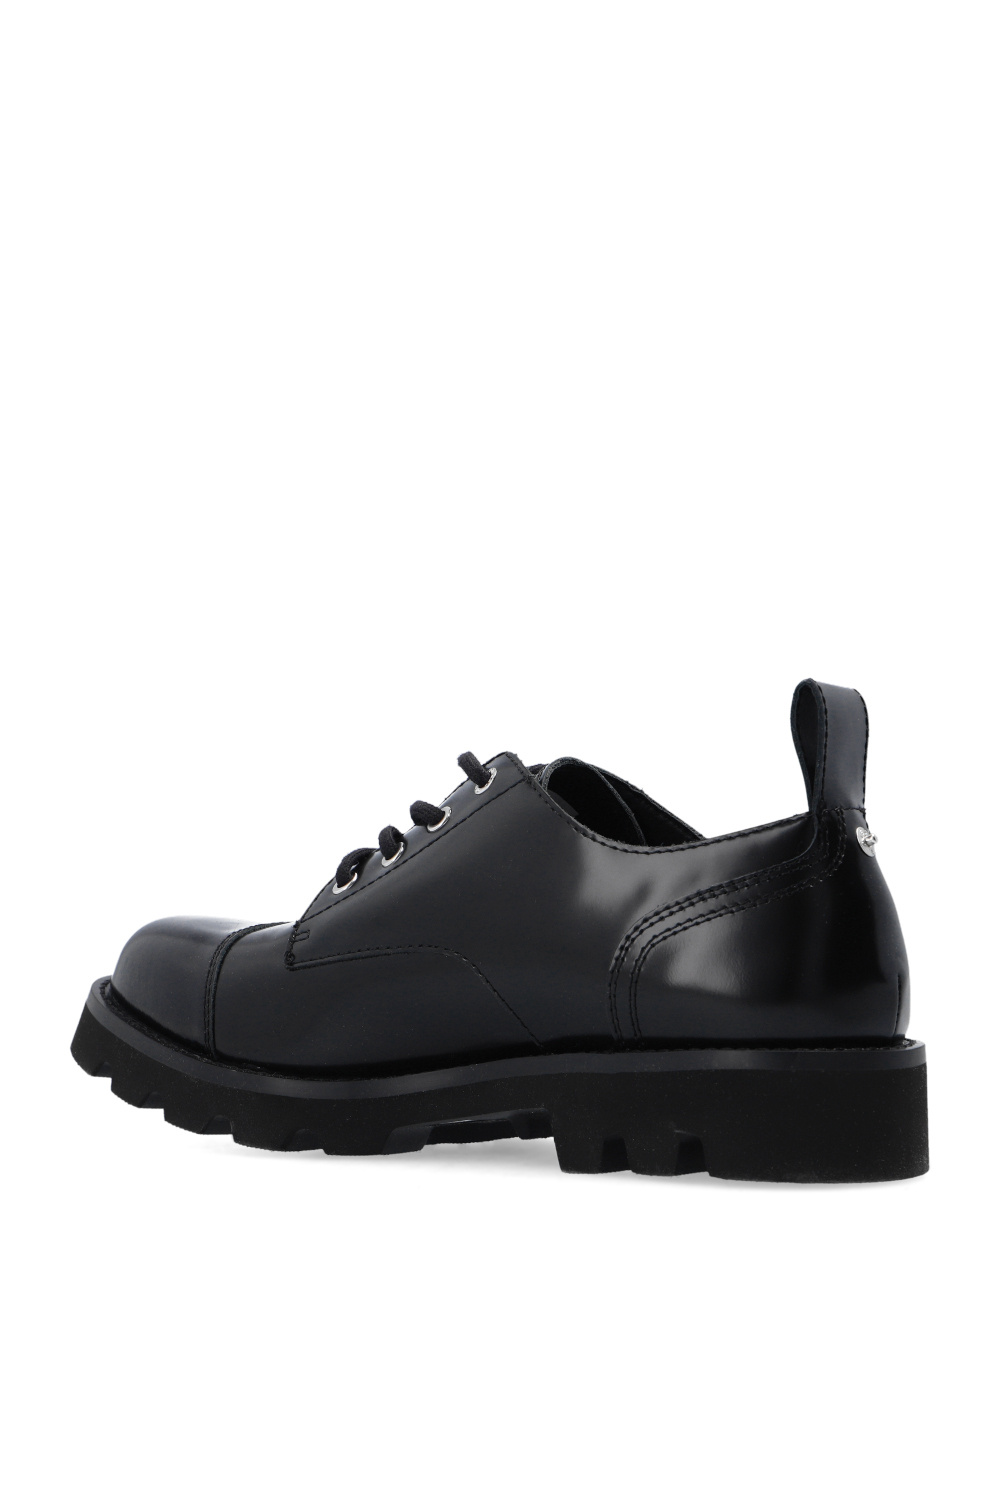 Diesel 'perforated leather Derby shoes Schwarz